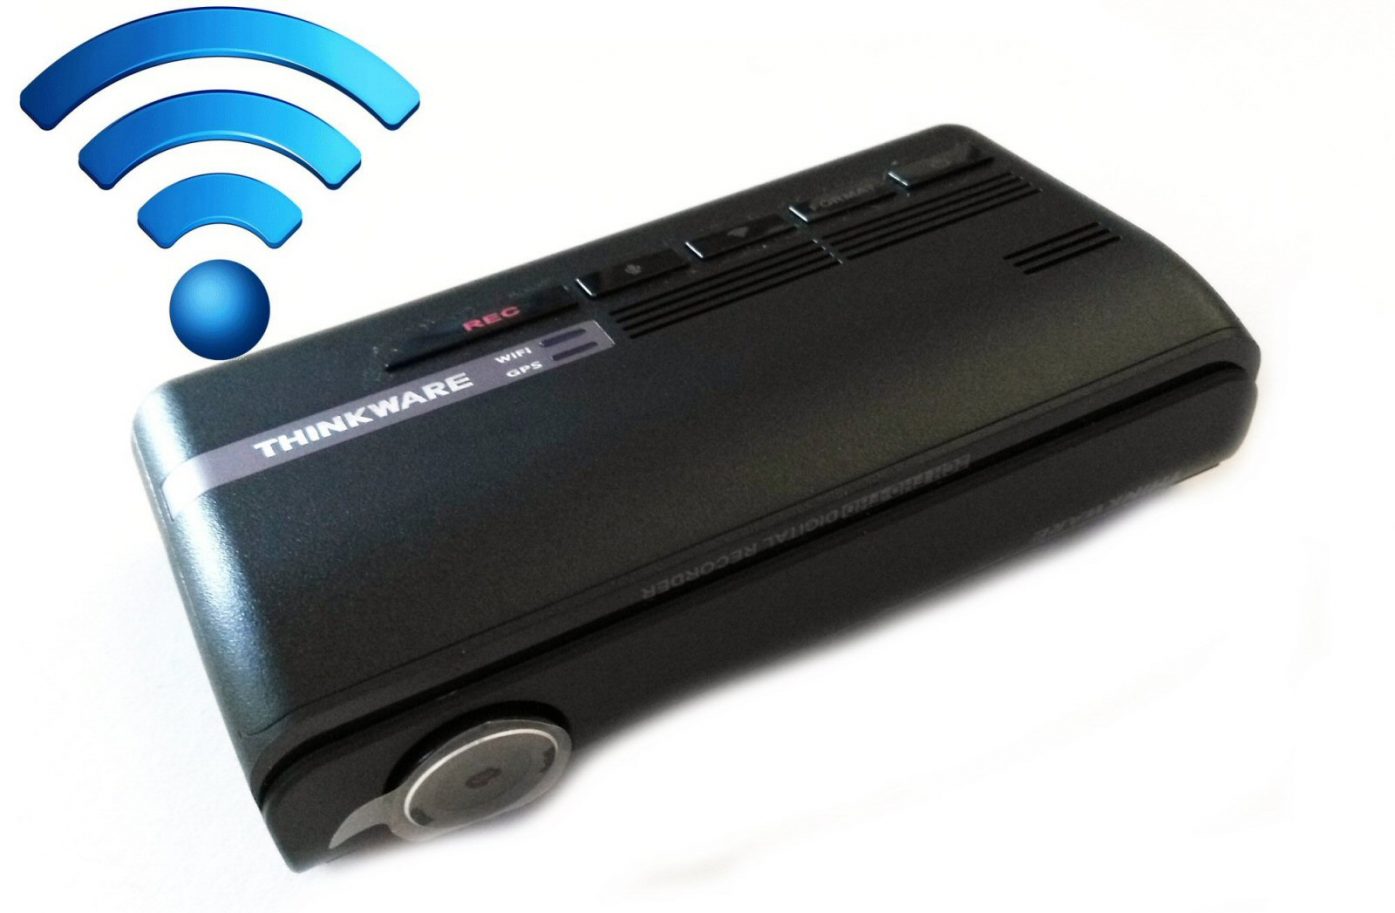 Thinkware F770 wifi connect